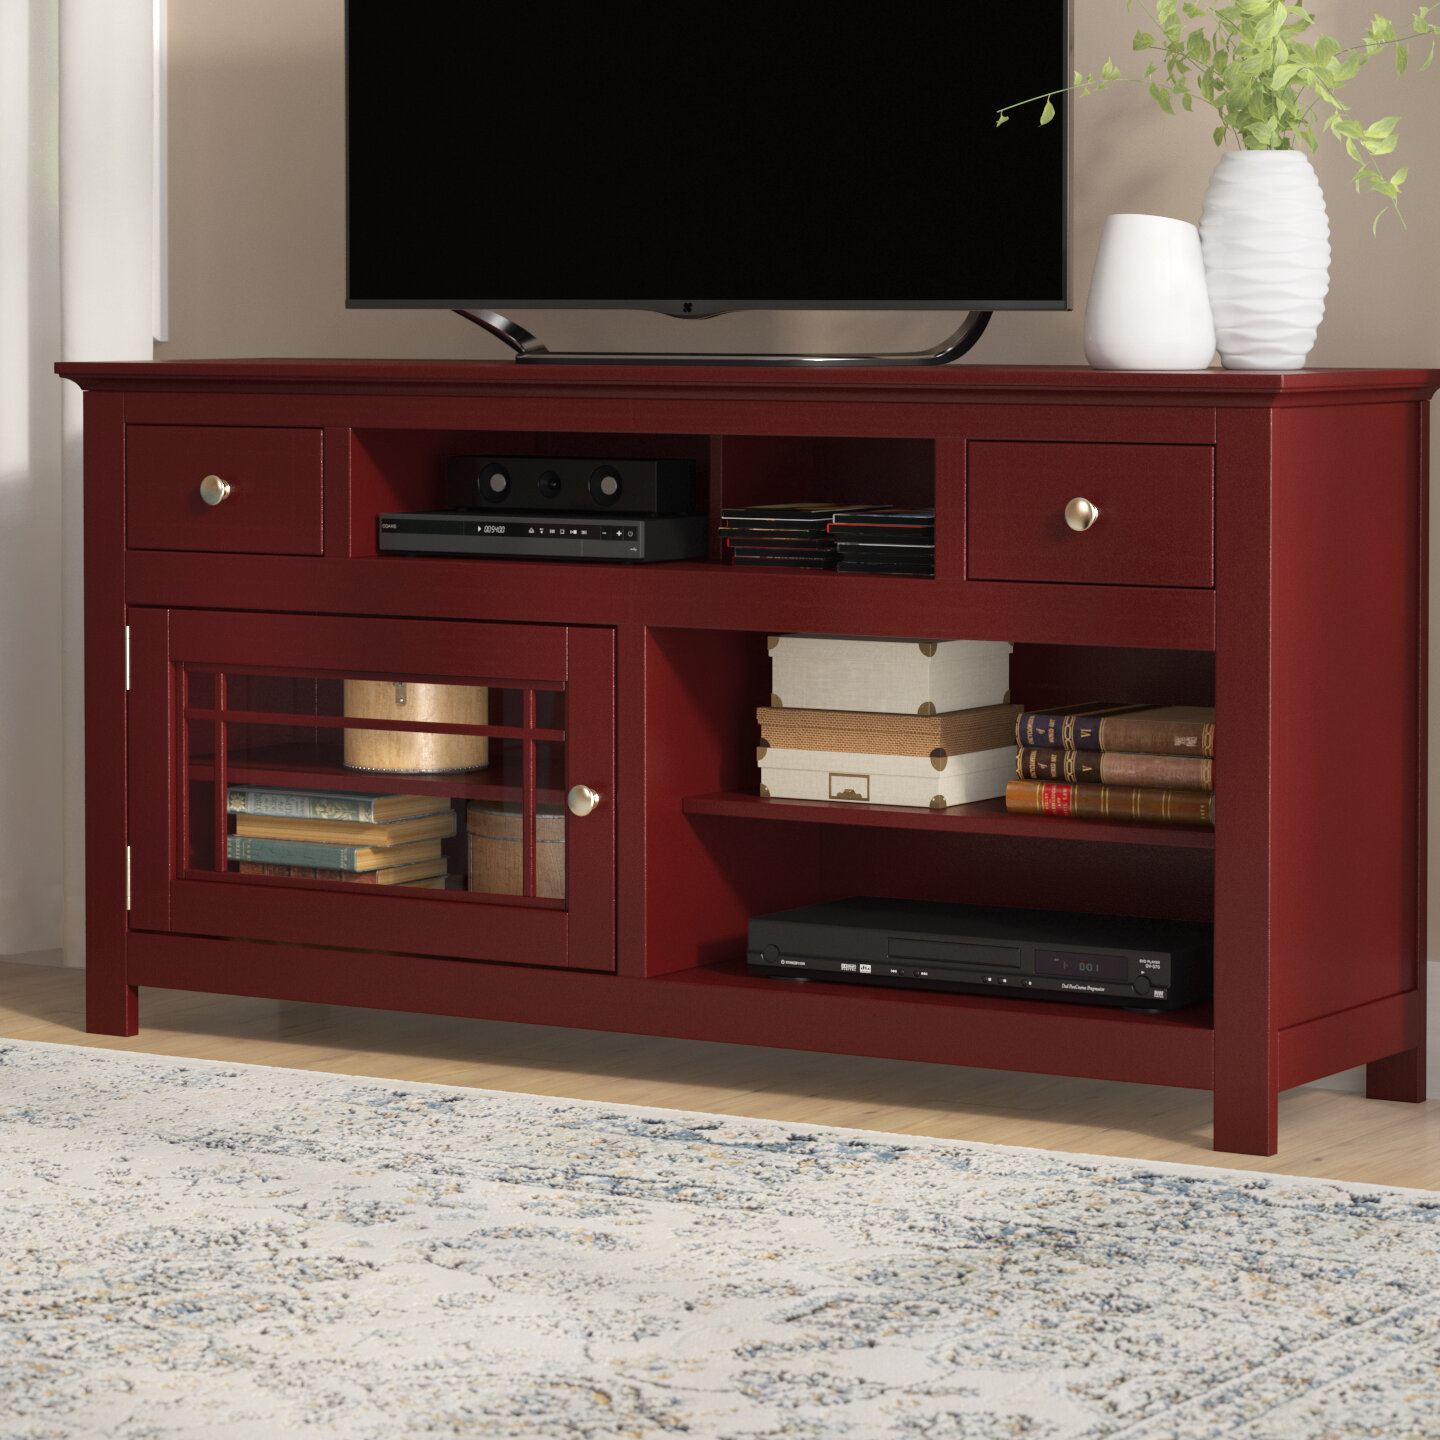 Darby Home Co Julee Tv Stand For Tvs Up To 70 Reviews Wayfair